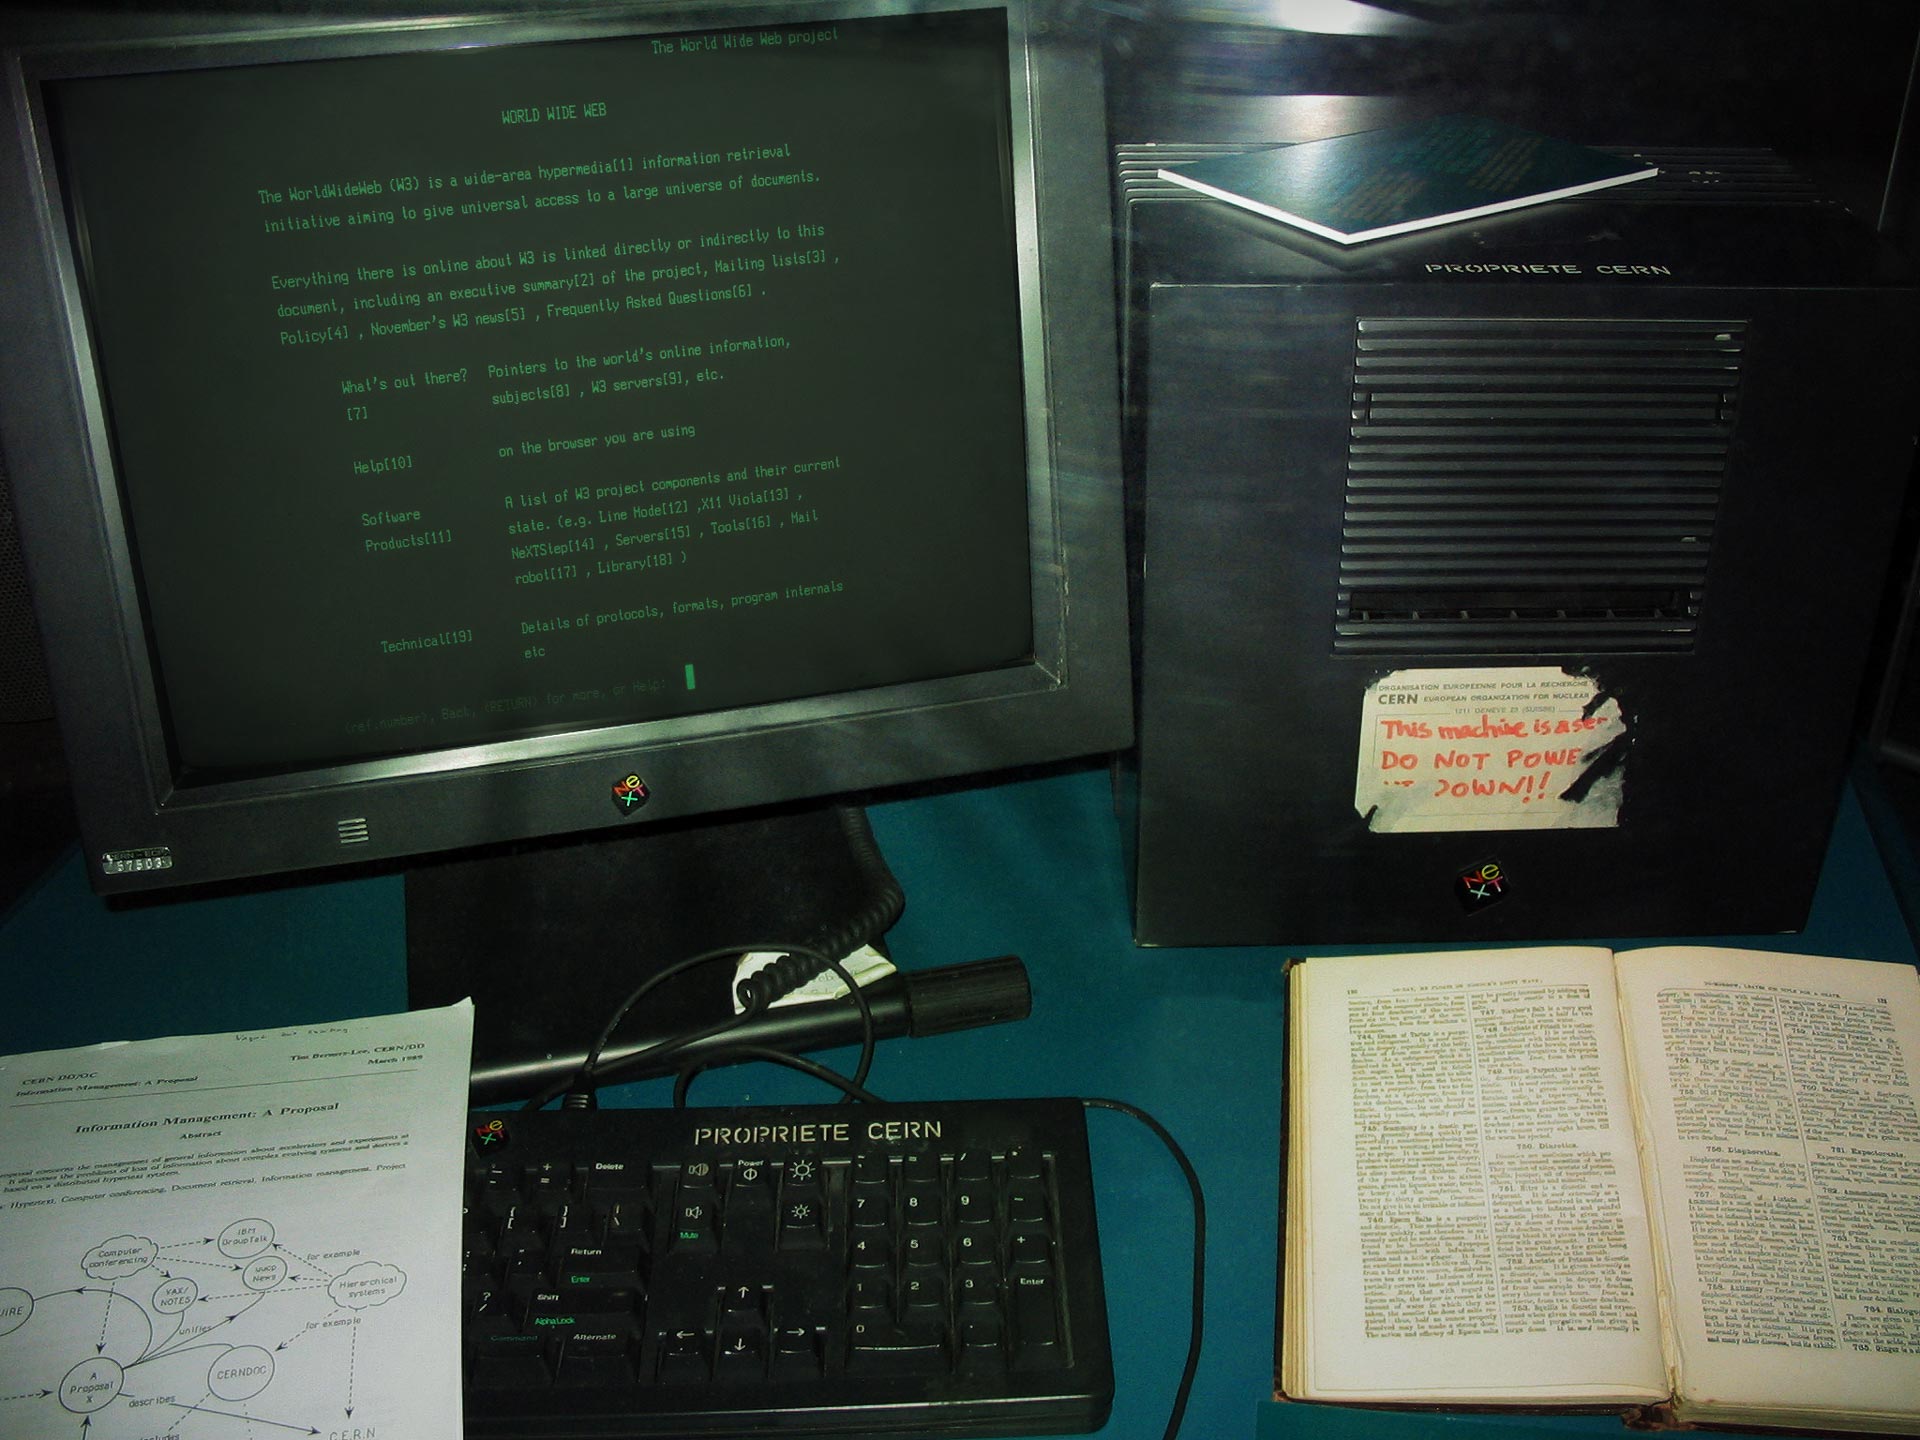 This NeXT workstation (a NeXTcube) was used by Tim Berners-Lee as the first Web server on the World Wide Web. It is shown here as displayed in 2005 at Microcosm, the public science museum at CERN (where Berners-Lee was working in 1991 when he invented the Web). The document resting on the keyboard is a copy of 